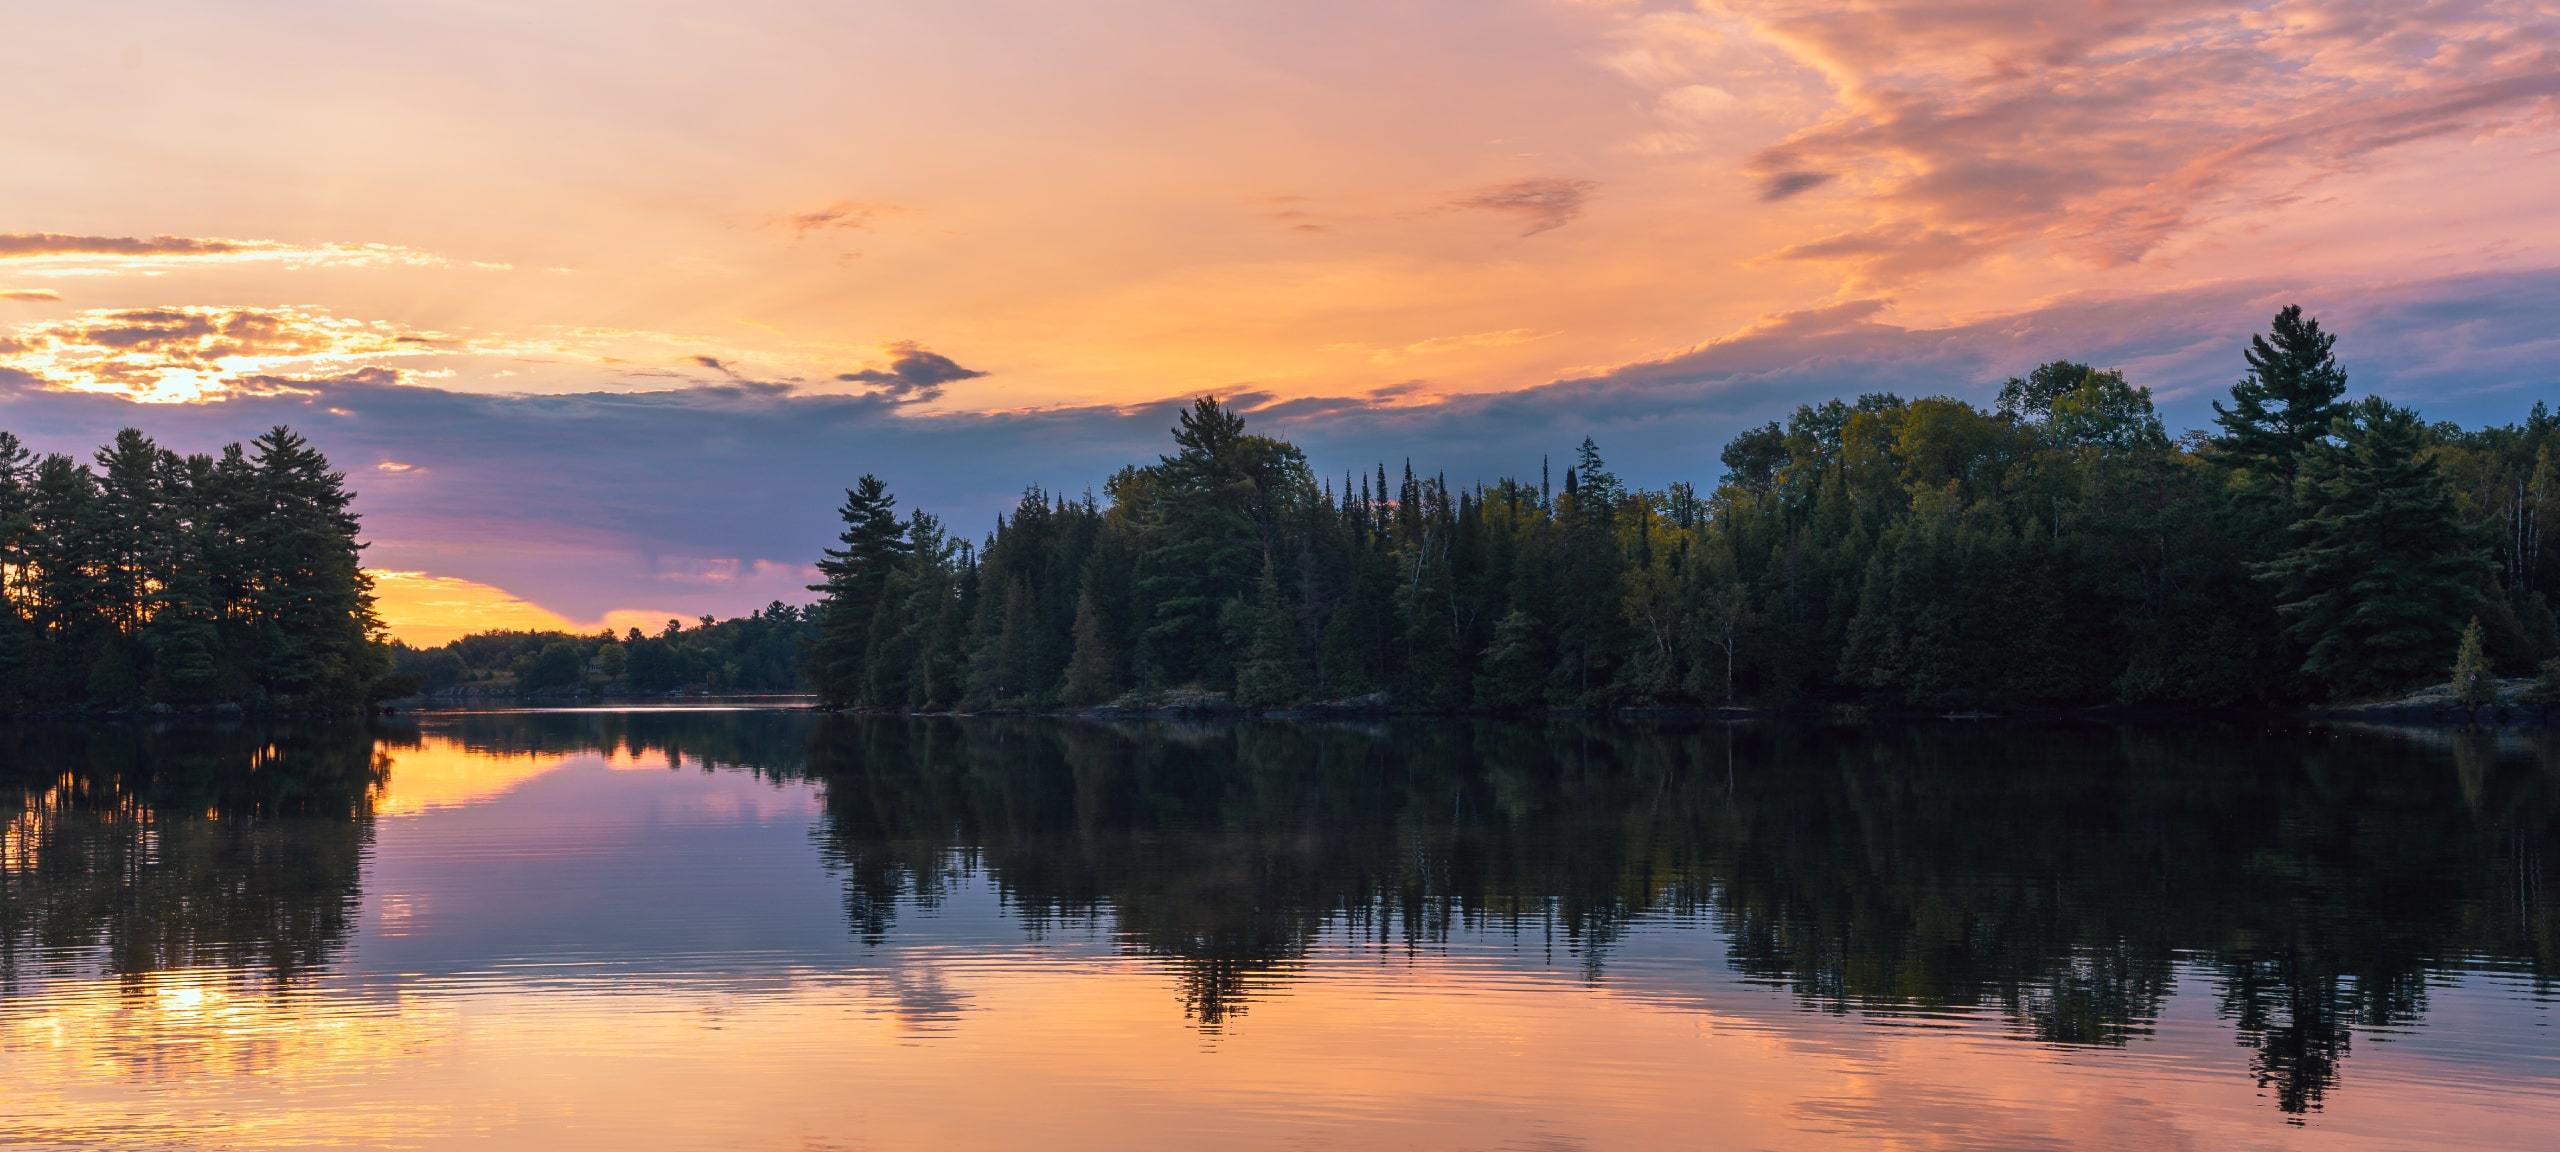 Pink sunset over forest and Muskoka lake